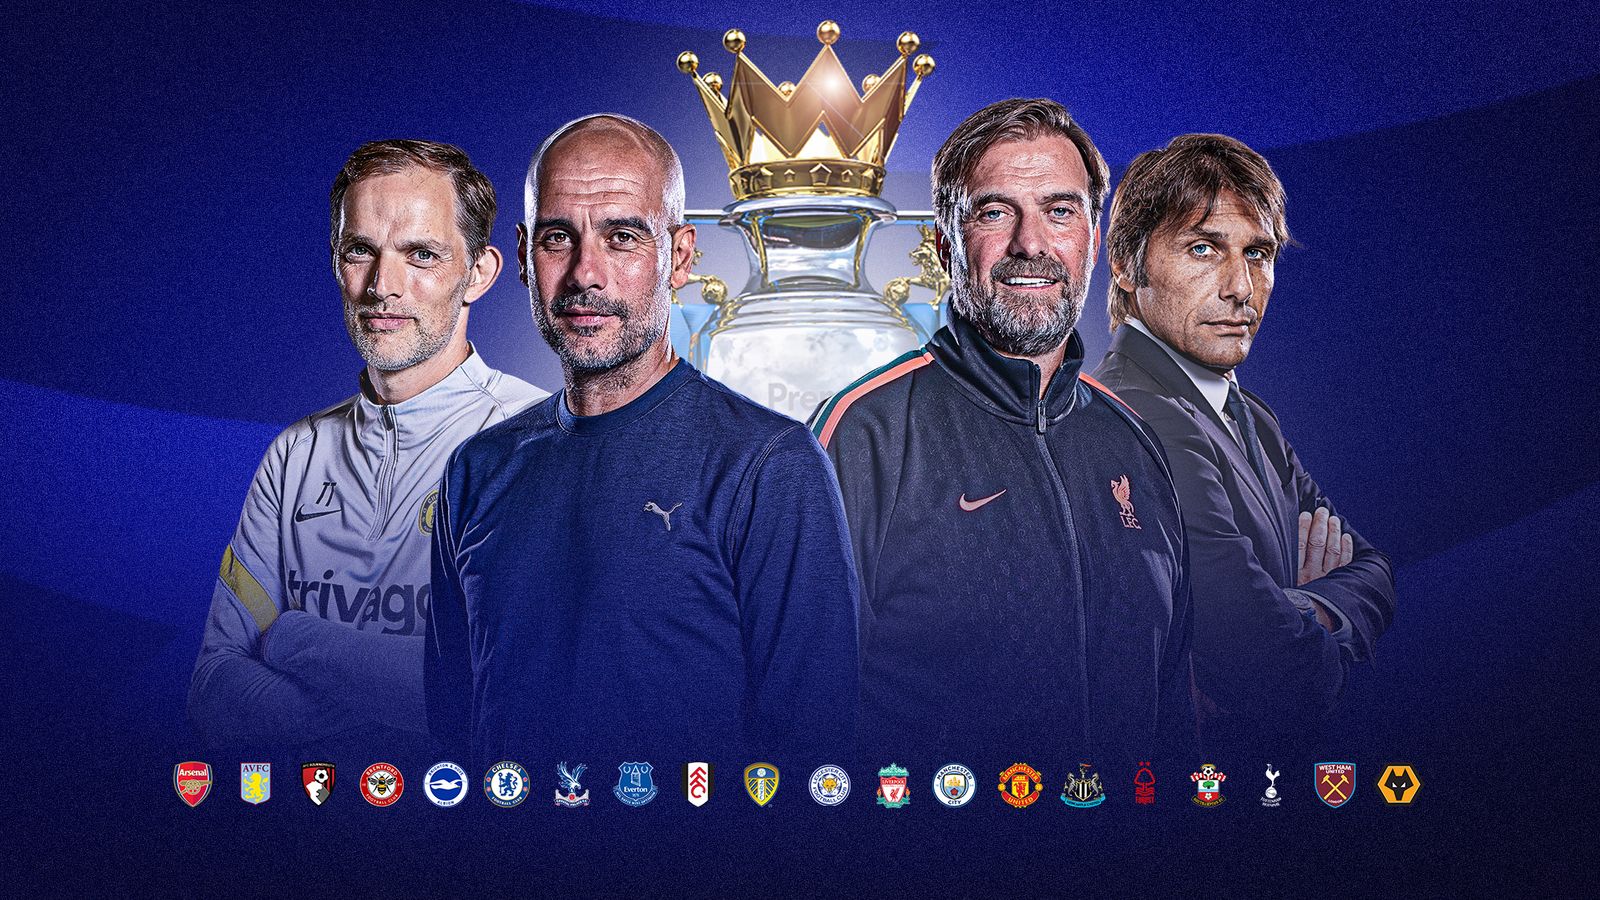 Premier League 2022/23 fixtures, dates and schedule Manchester City begin title defence at West Ham after Crystal Palace vs Arsenal curtain-raiser Football News Sky Sports